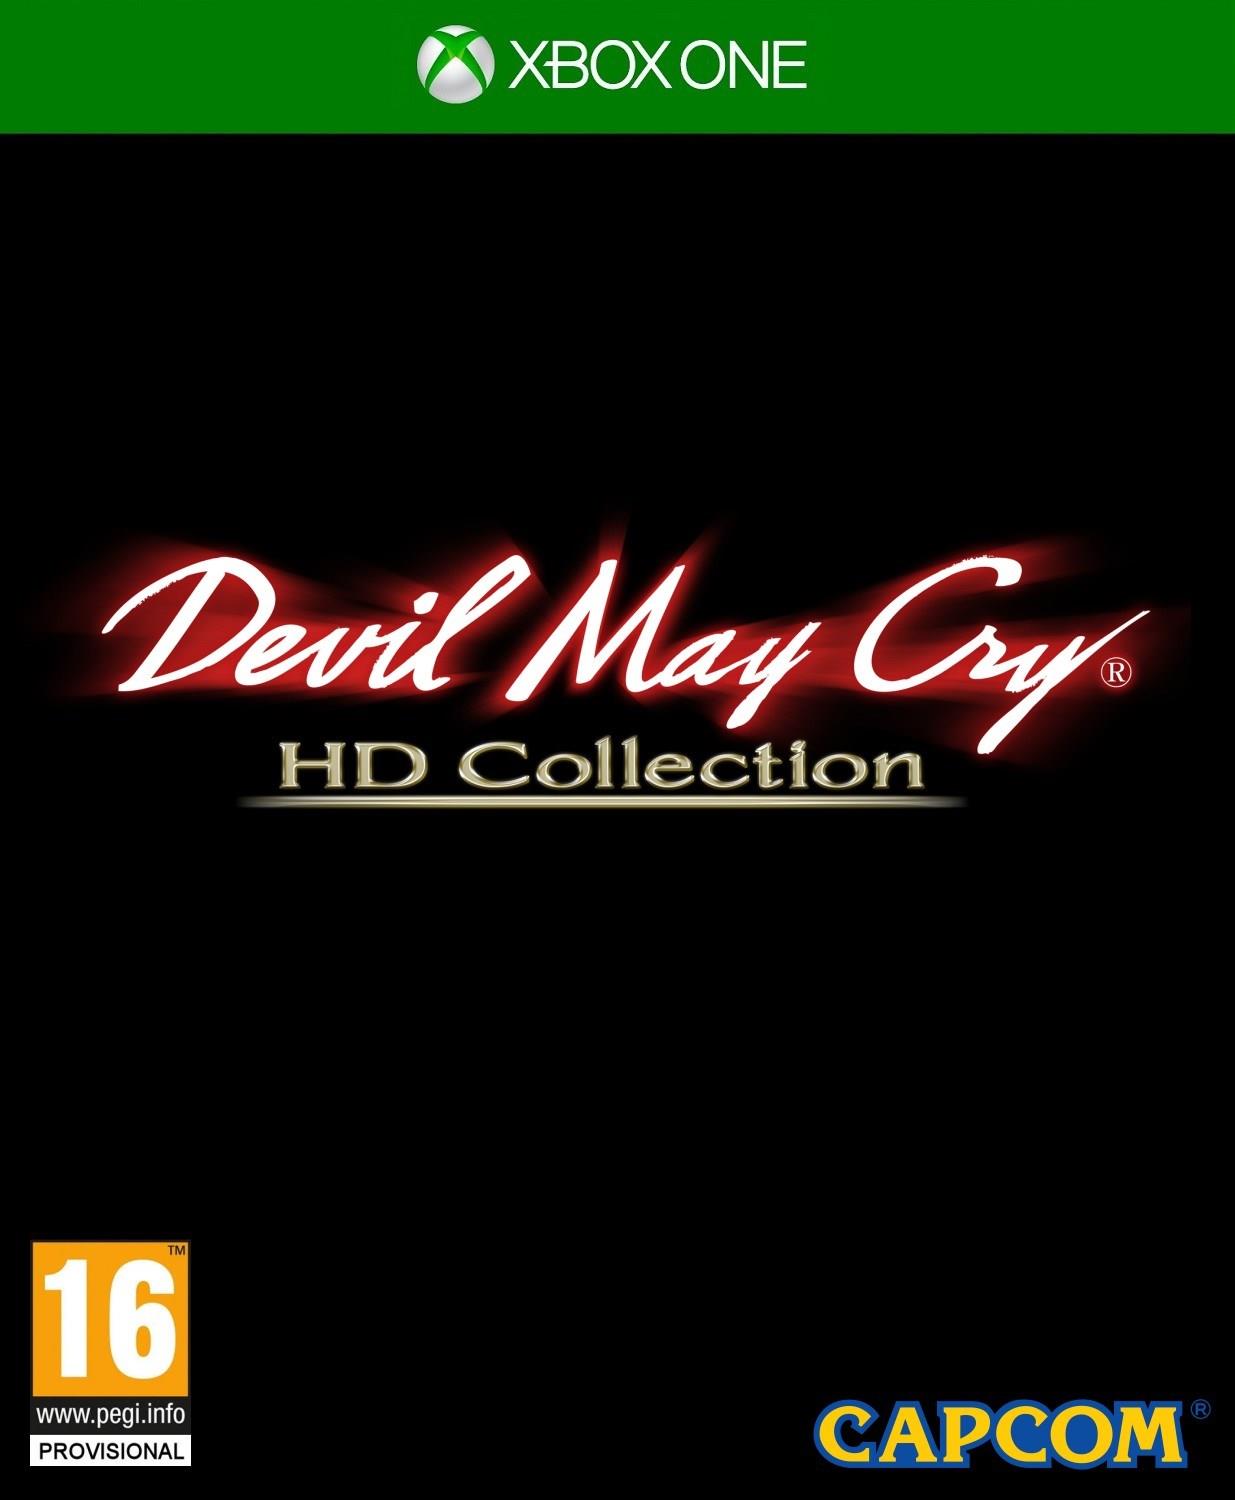 Devil May Cry HD Collection - Xbox One title=Devil May Cry HD Collection - Xbox One